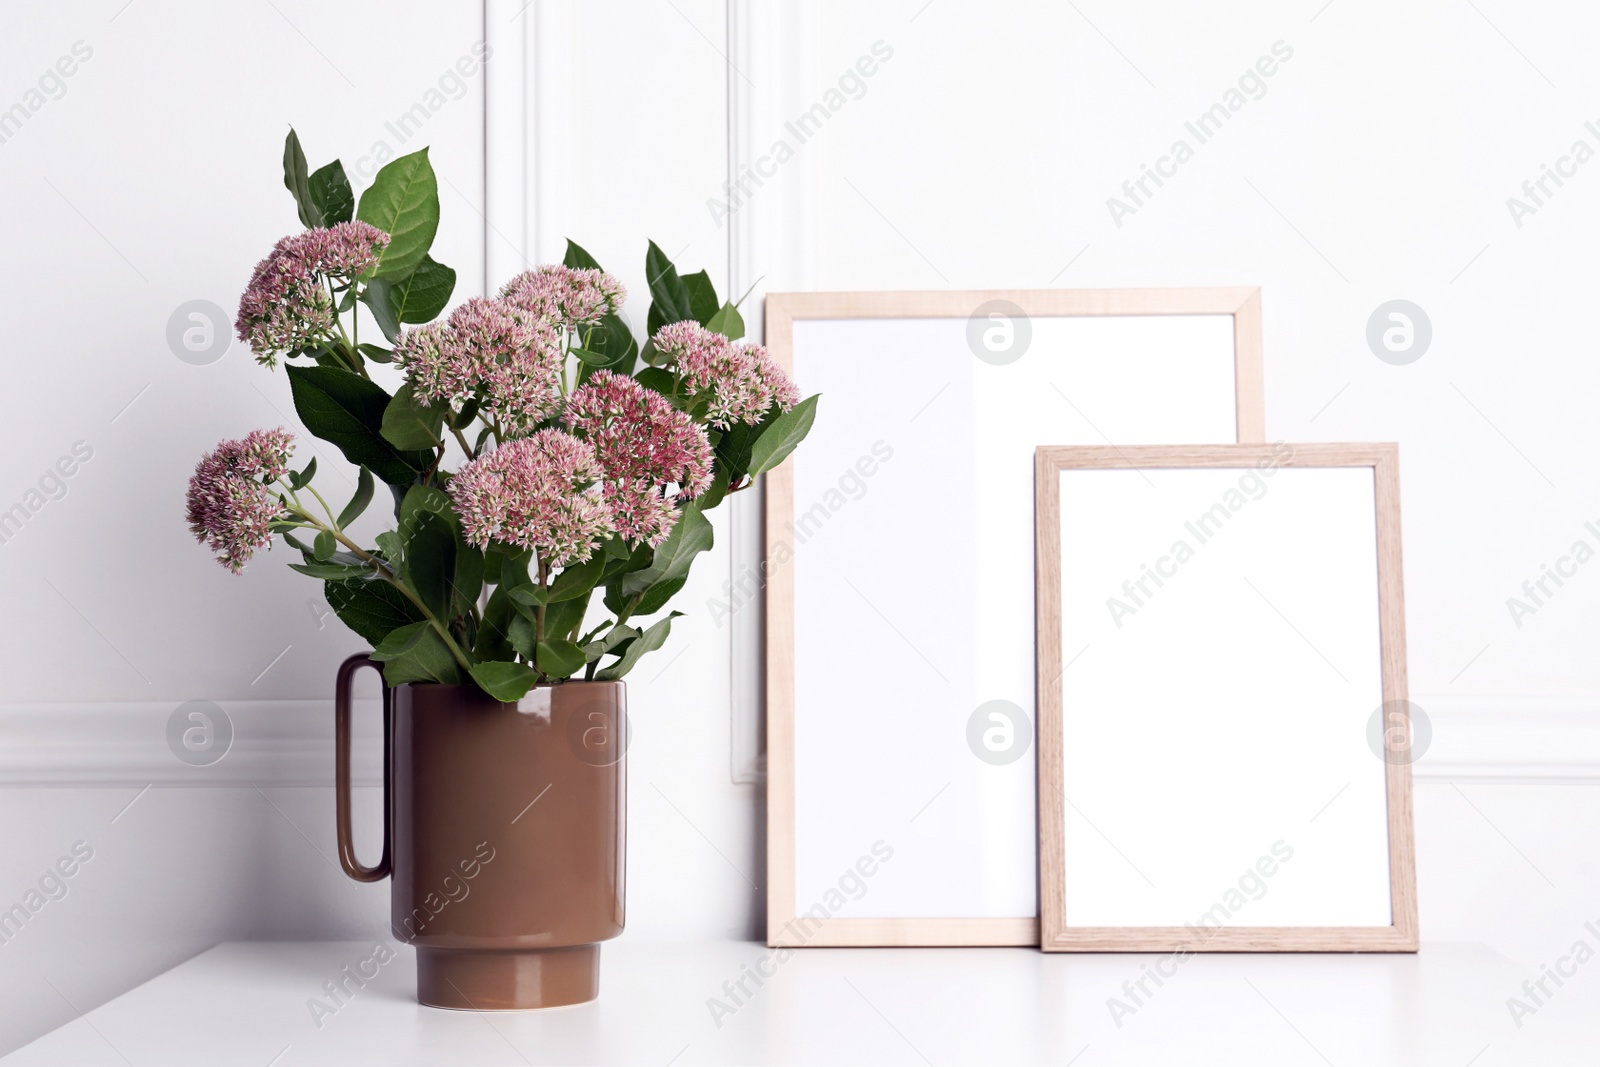 Photo of Stylish ceramic vase with beautiful flowers and blank frames on table near white wall